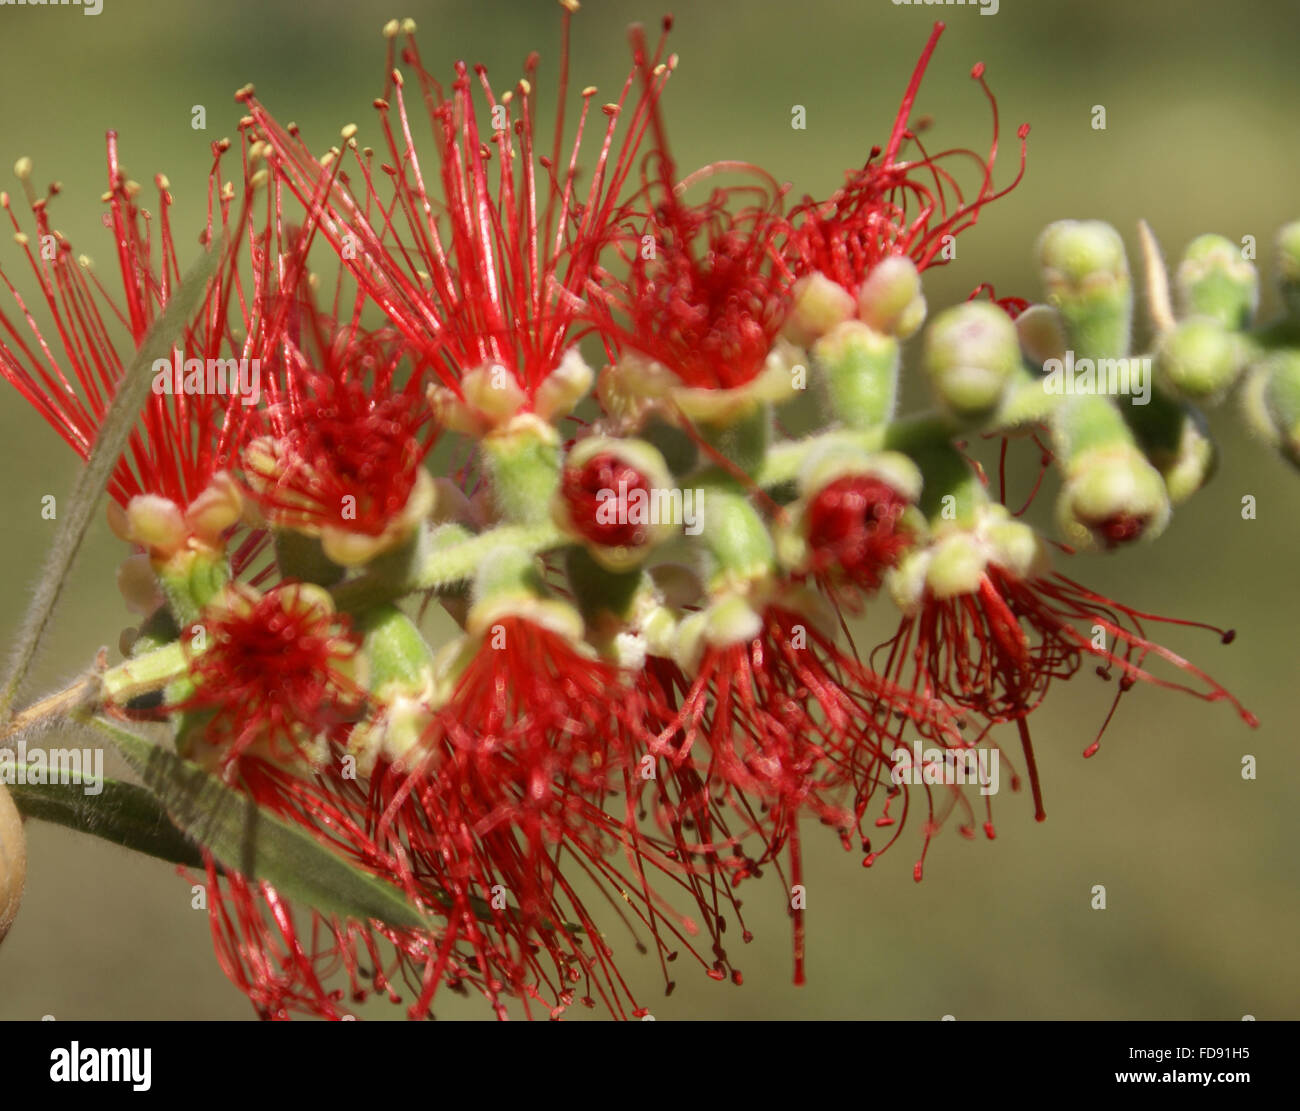 Callistemon viminalis, Weeping bottlebrush, evergreen tree drooping branches, linear-lanceolate hairy leaves and red flowers, Stock Photo